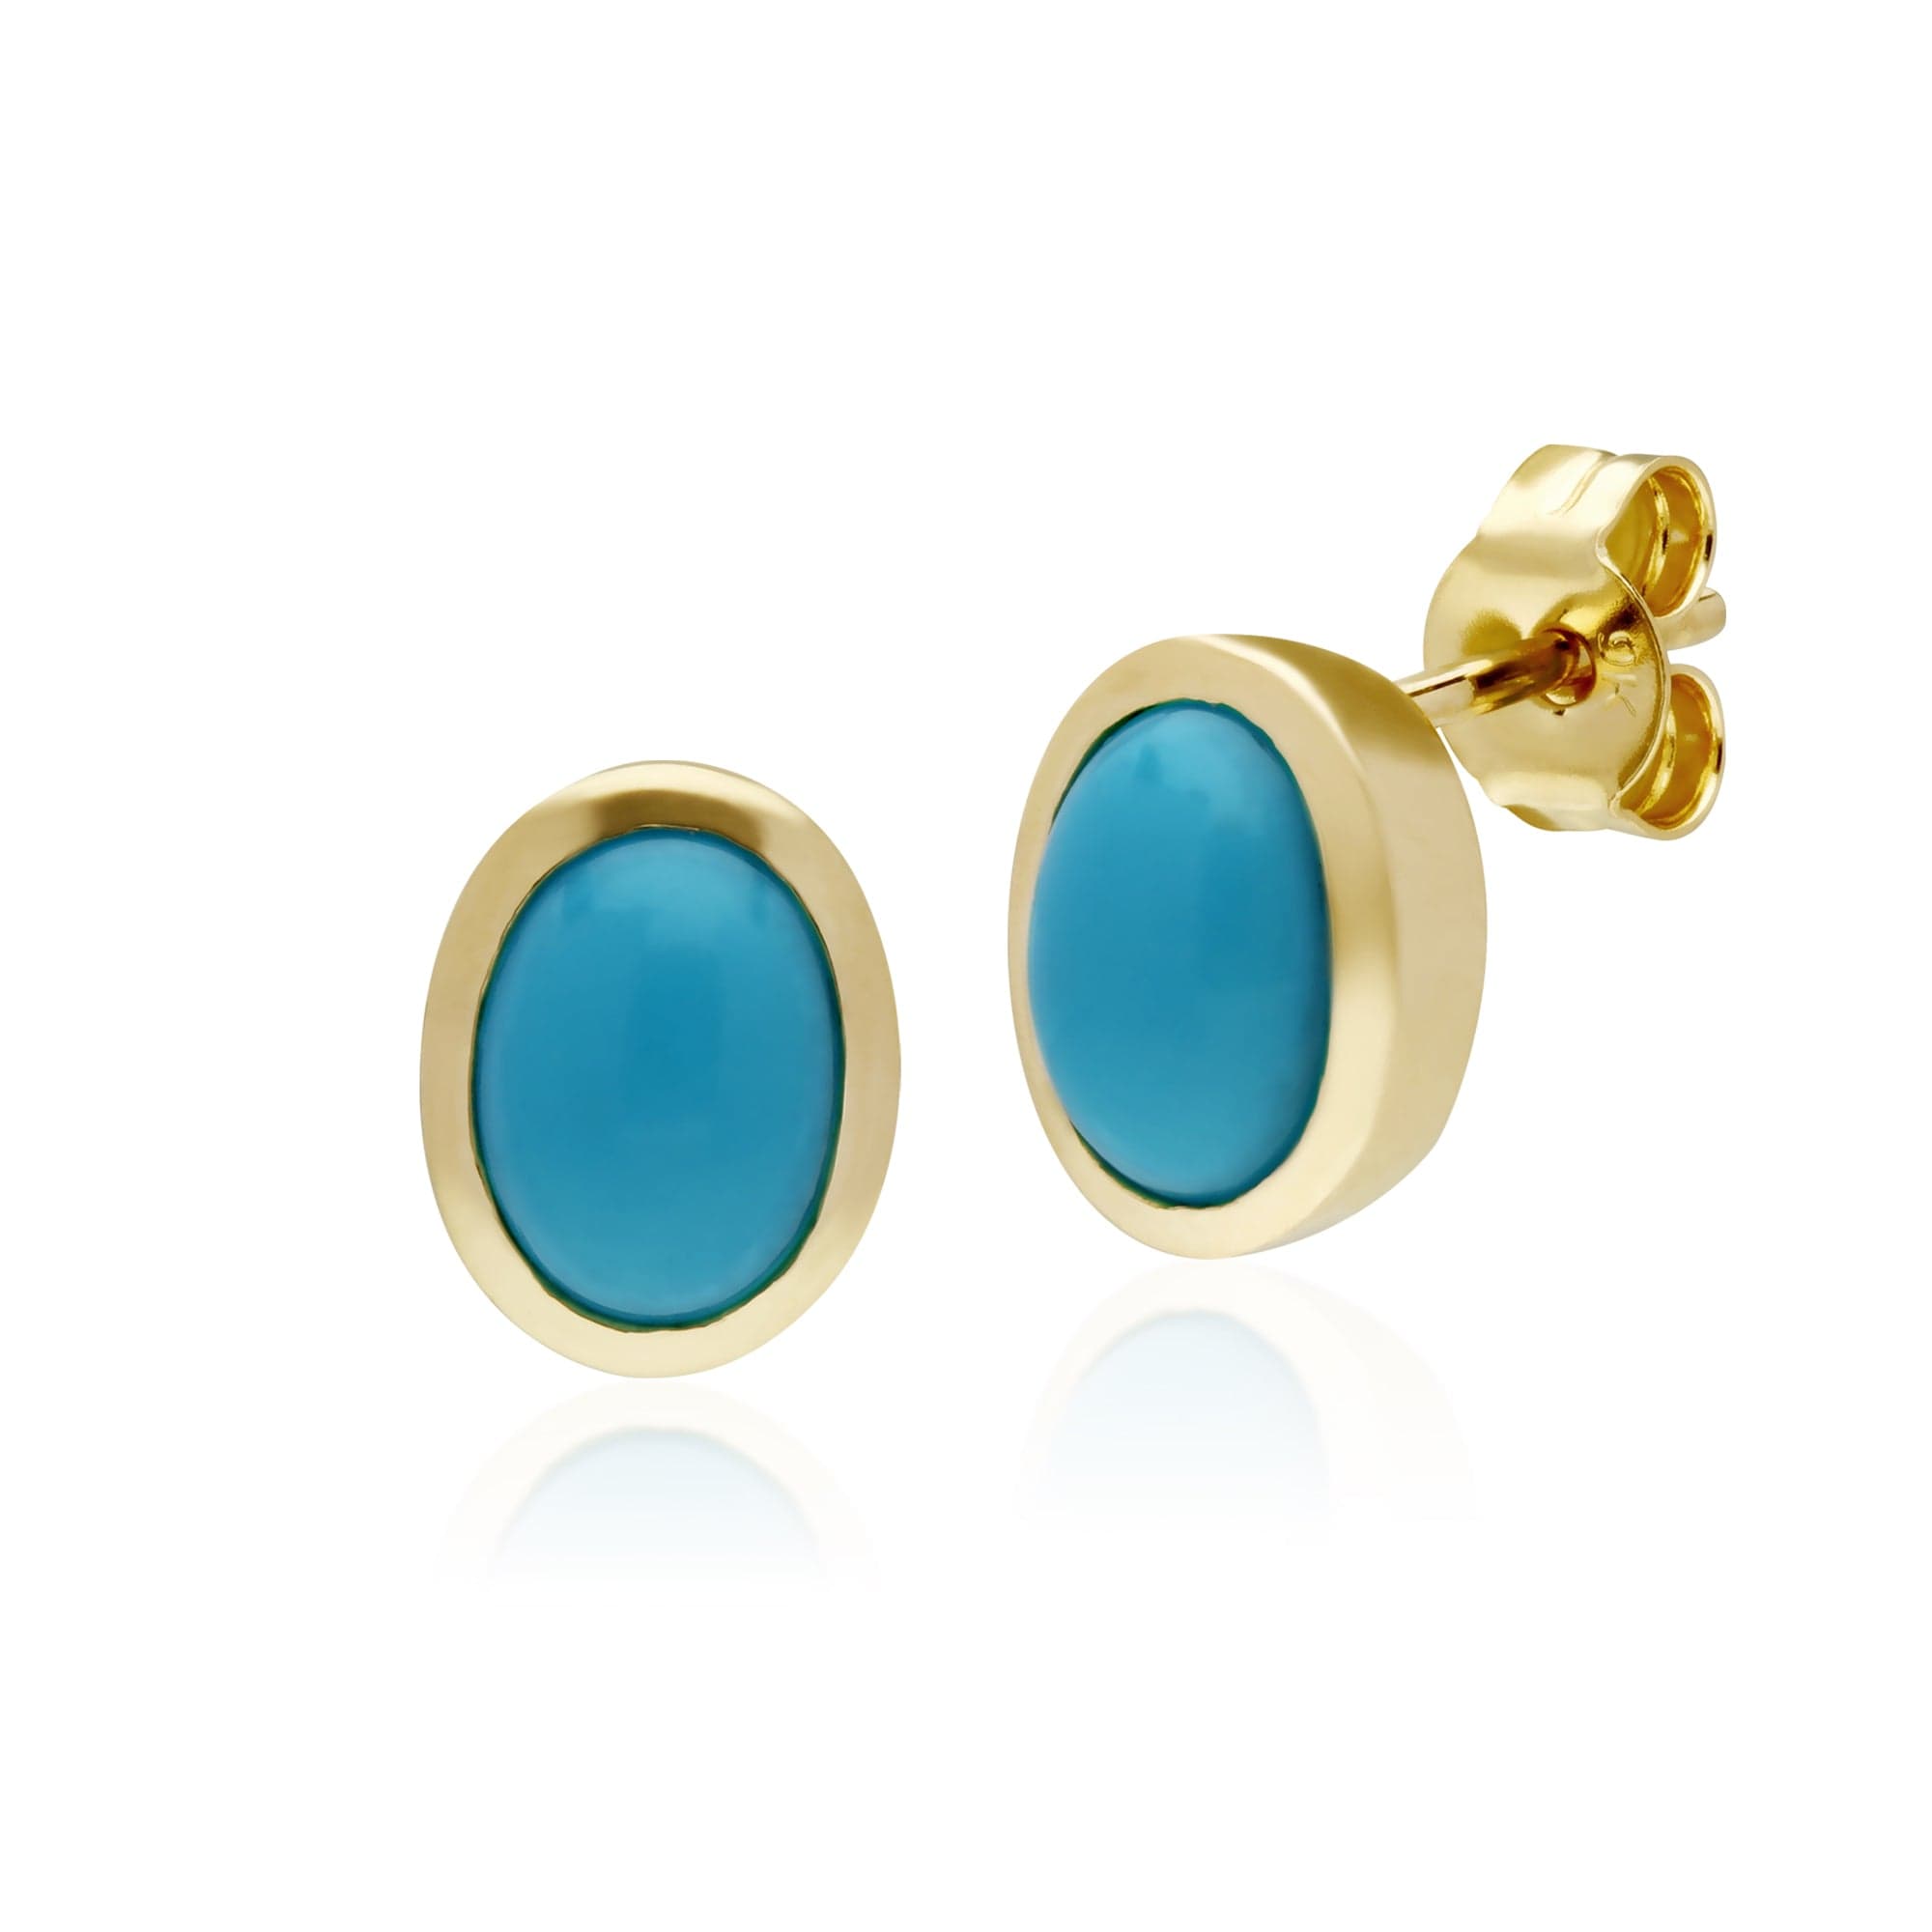 16661 Classic Oval Turquoise Stud Earrings in 9ct Yellow Gold 7x6mm 2